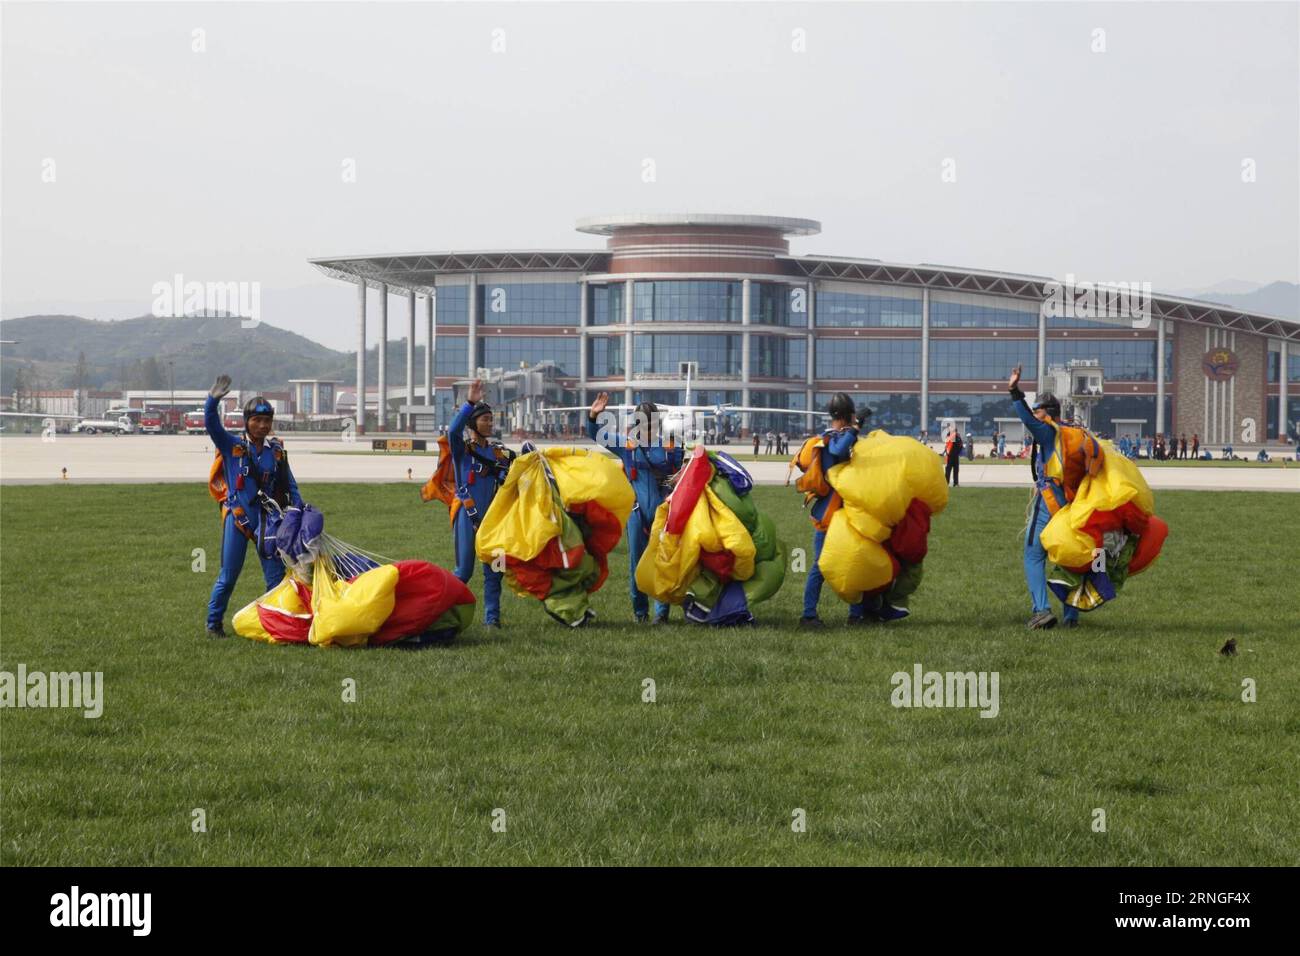 (160925) -- PYONGYANG, Sept. 25, 2016 -- Parachutists land after performance during an international air show in Wonsan, the Democratic People s Republic of Korea (DPRK), on Sept. 25, 2016, the second day of the international air show. The Wonsan International Friendship Air Festival, the first of its kind in the DPRK, runs from Saturday through Sunday at Kalma International Airport, which was redesigned and reconstructed from a military airfield to promote tourism. ) (cl) DPRK-WONSAN-INTERNATIONAL AIR SHOW ZhuxLongchuan PUBLICATIONxNOTxINxCHN   Pyongyang Sept 25 2016 parachutistsperson Parach Stock Photo